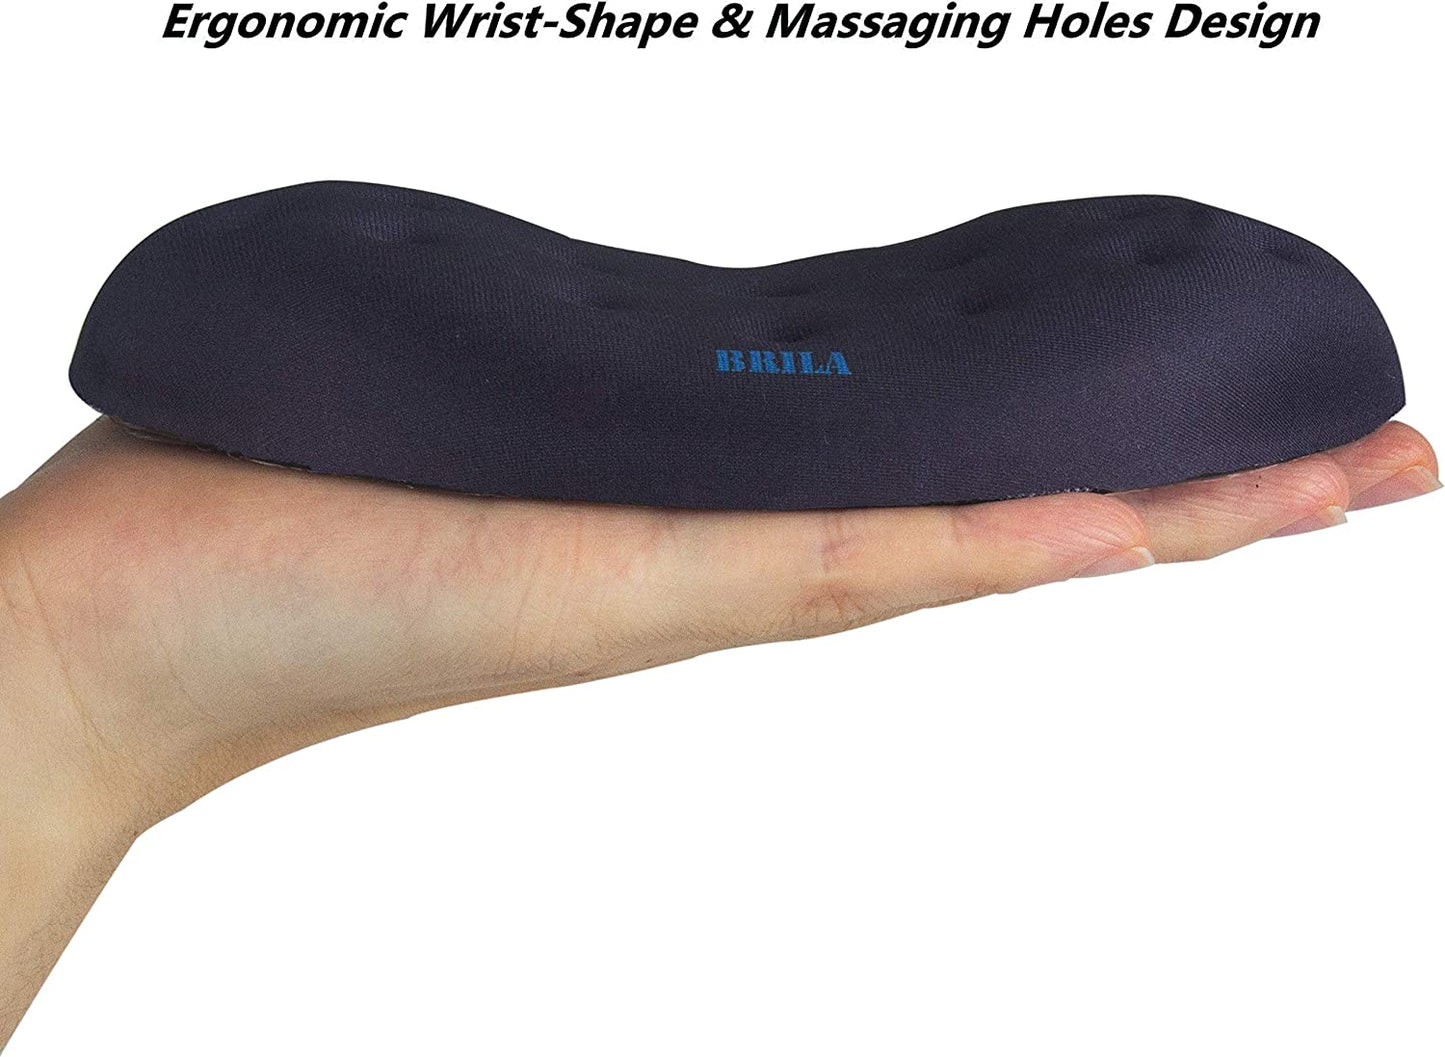 BRILA Upgraded Ergonomic Memory Foam Mouse Wrist Rest Support Pad Cushion for Computer, Laptop, Office Work, PC Gaming - Massage Holes Design Wrist Pain Relief